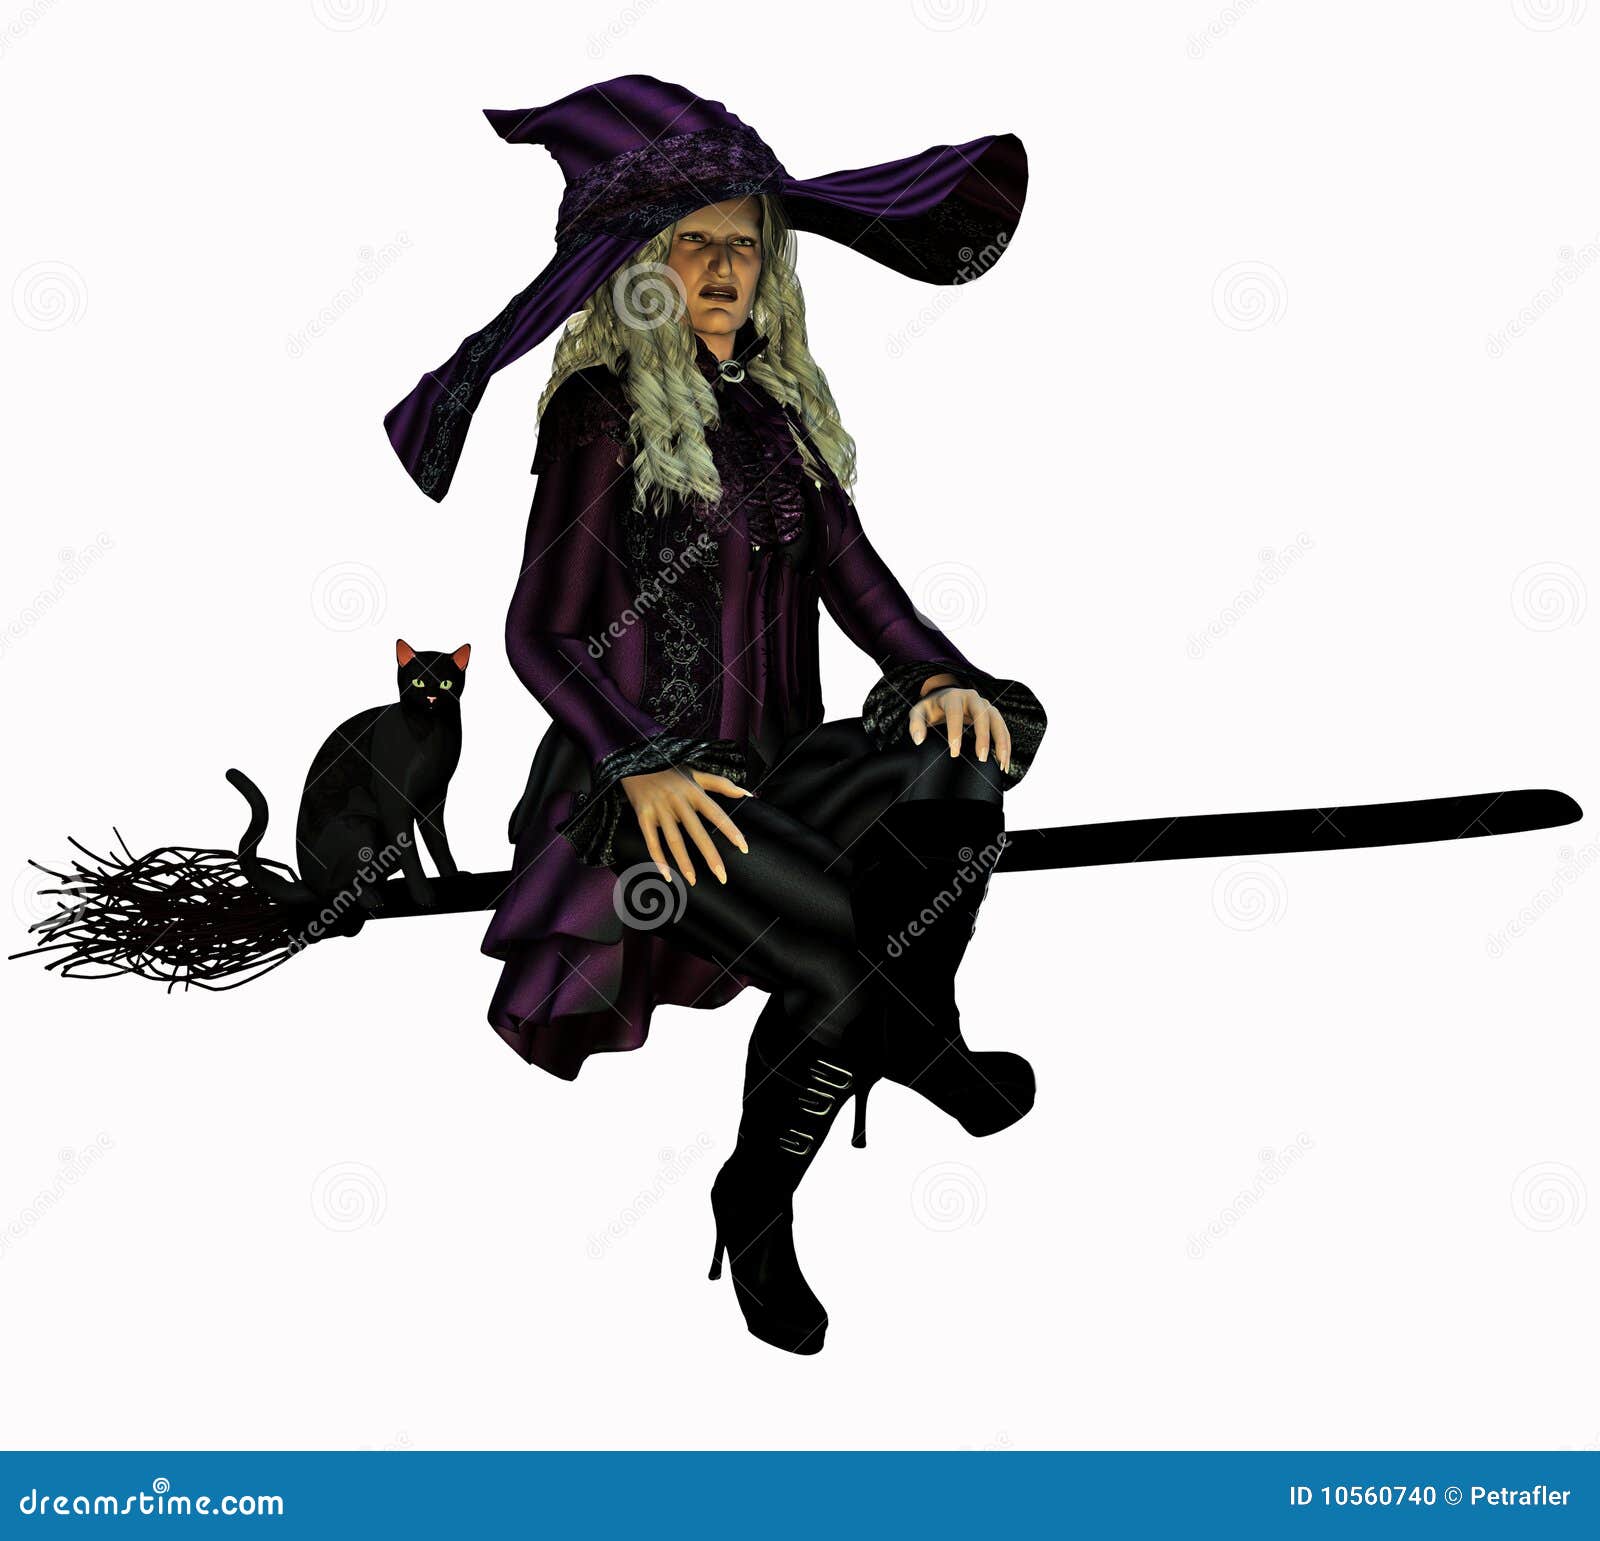 Witch on her broomstick stock illustration. Illustration of spooky